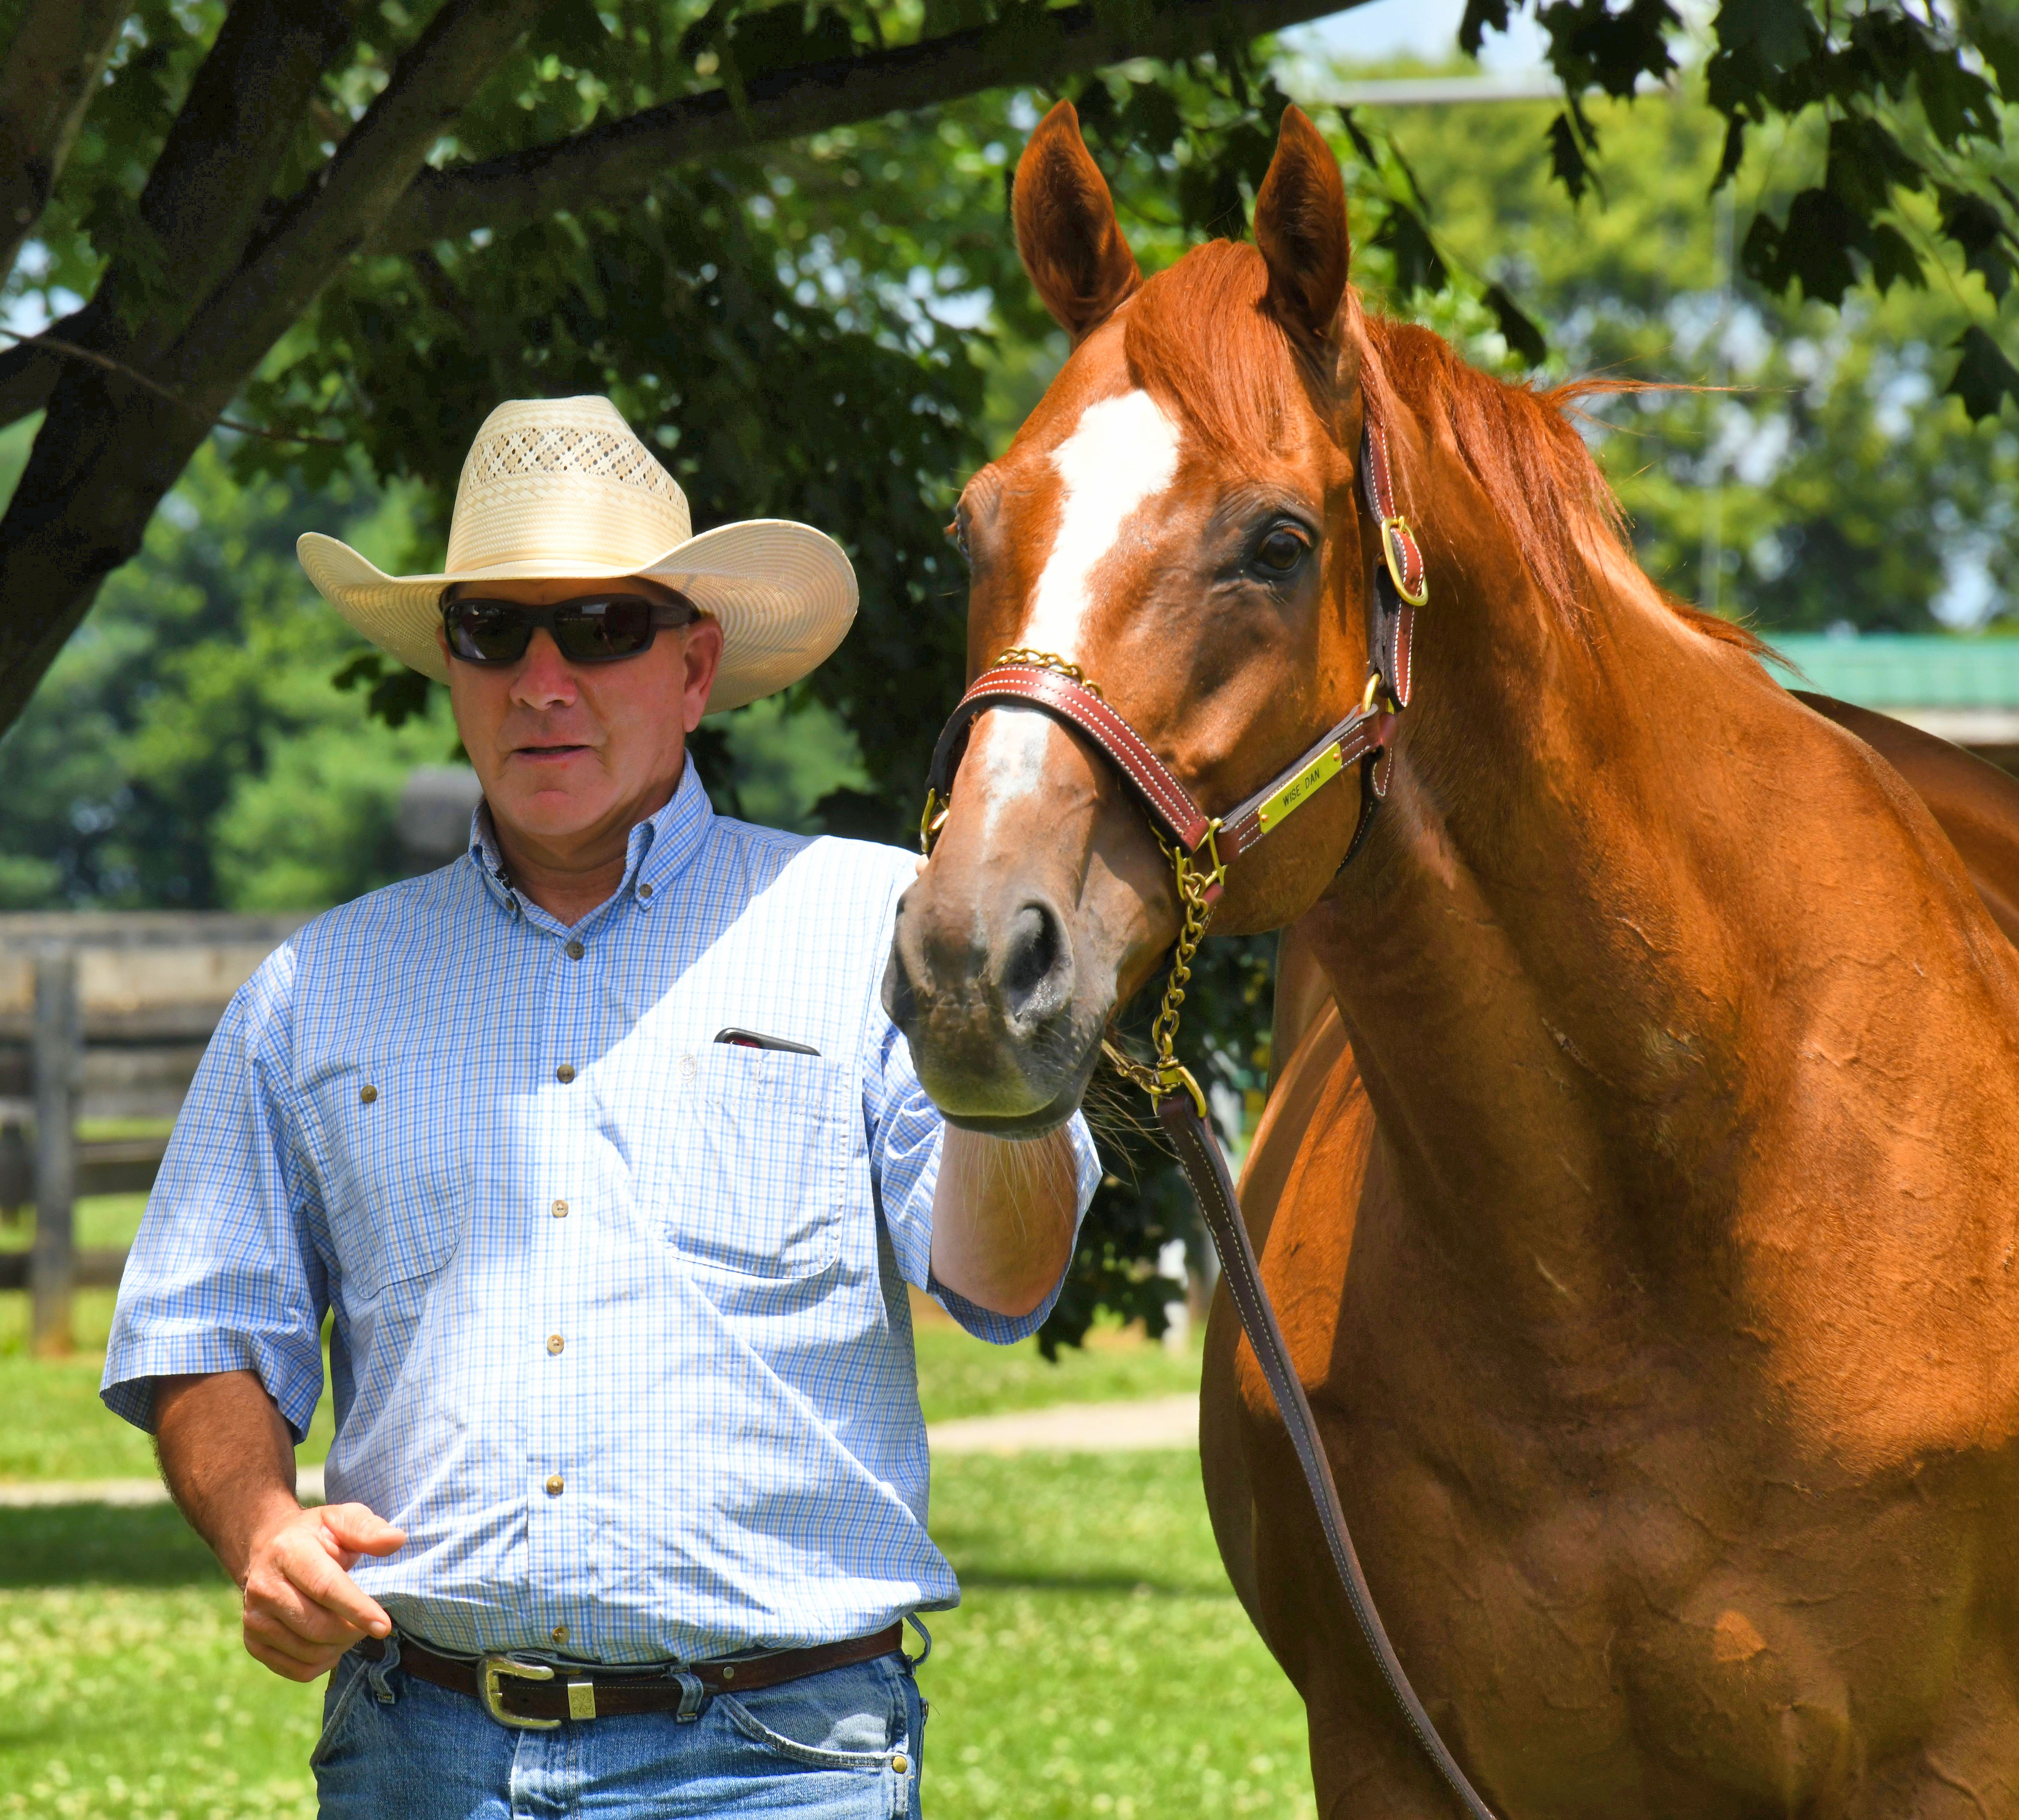 Wise Dan and trainer Charles LoPresti at Old Friends, Georgetown, KY., 2019 (Laura Battles)